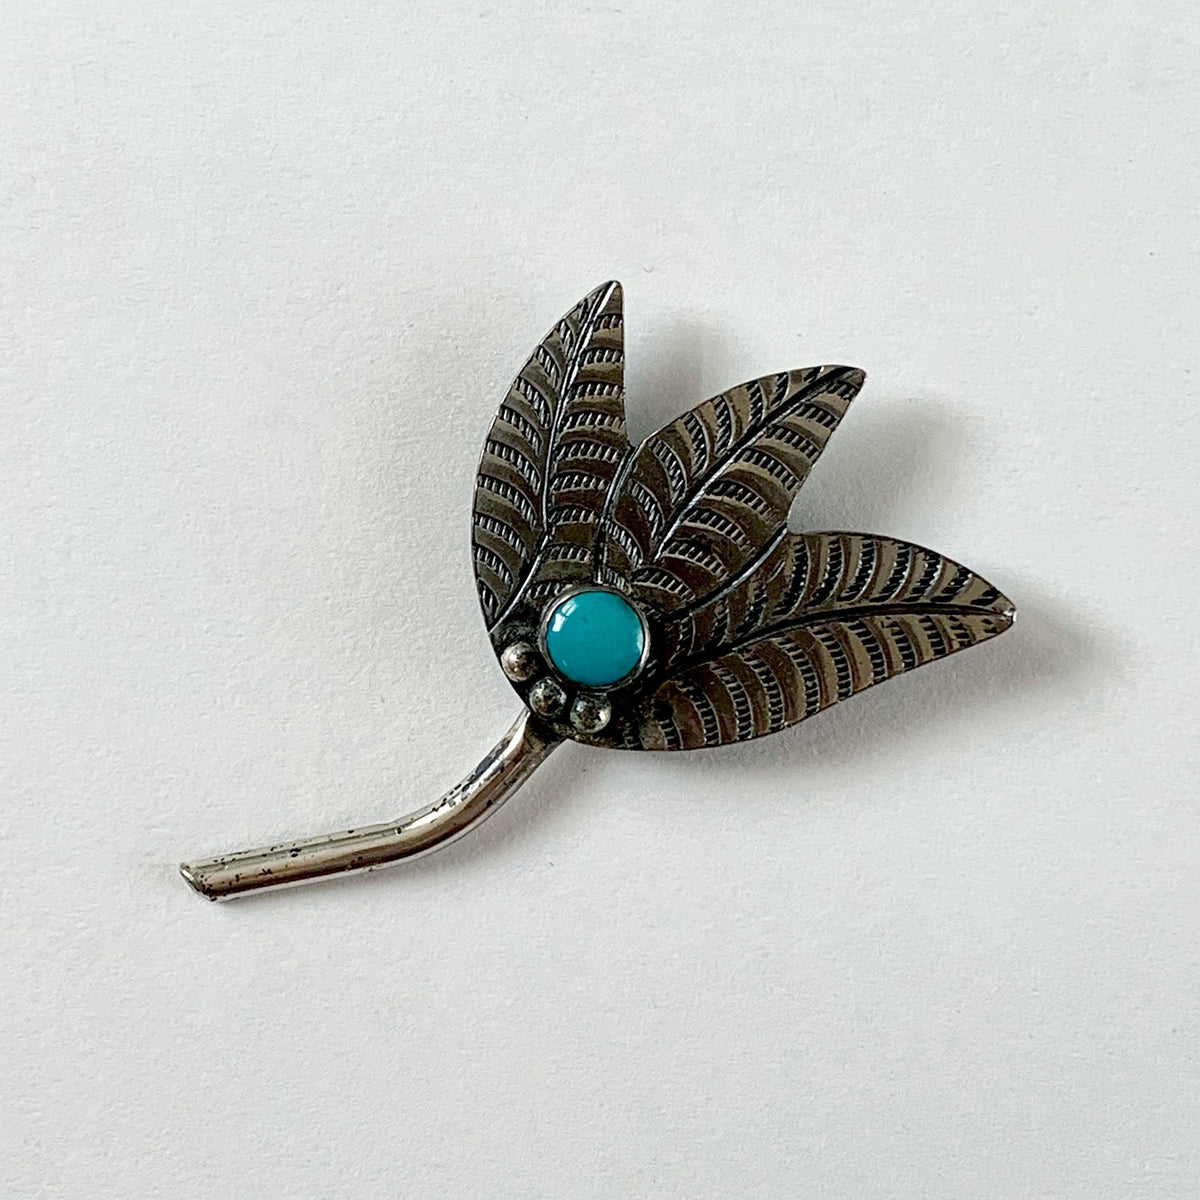 Vintage Sterling Flower Pin with Turquoise